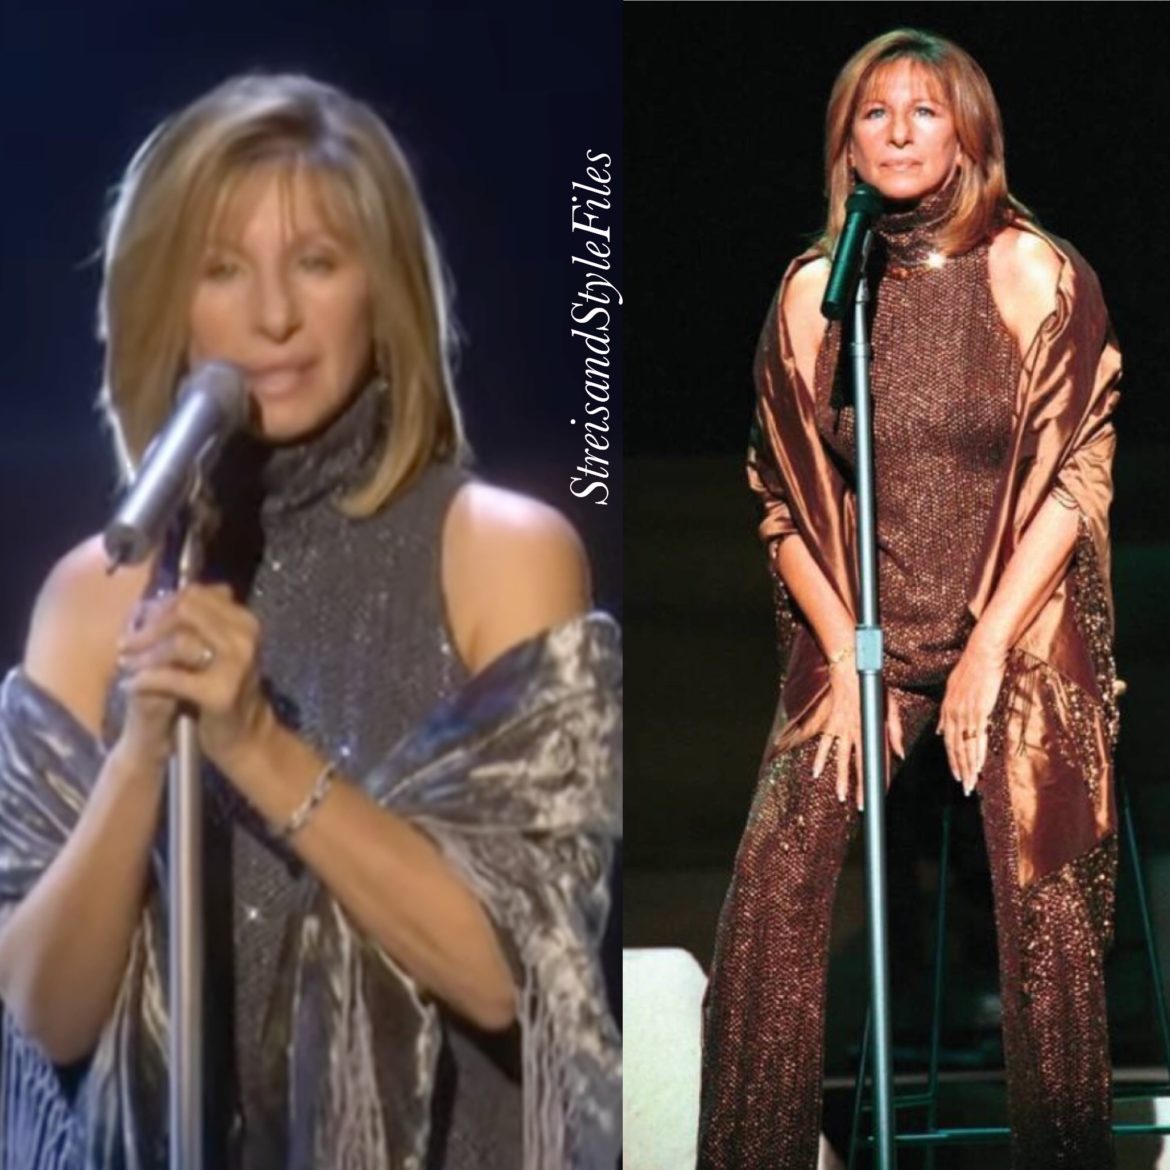 Timeless concert act one outfit, designed by Barbra Streisand